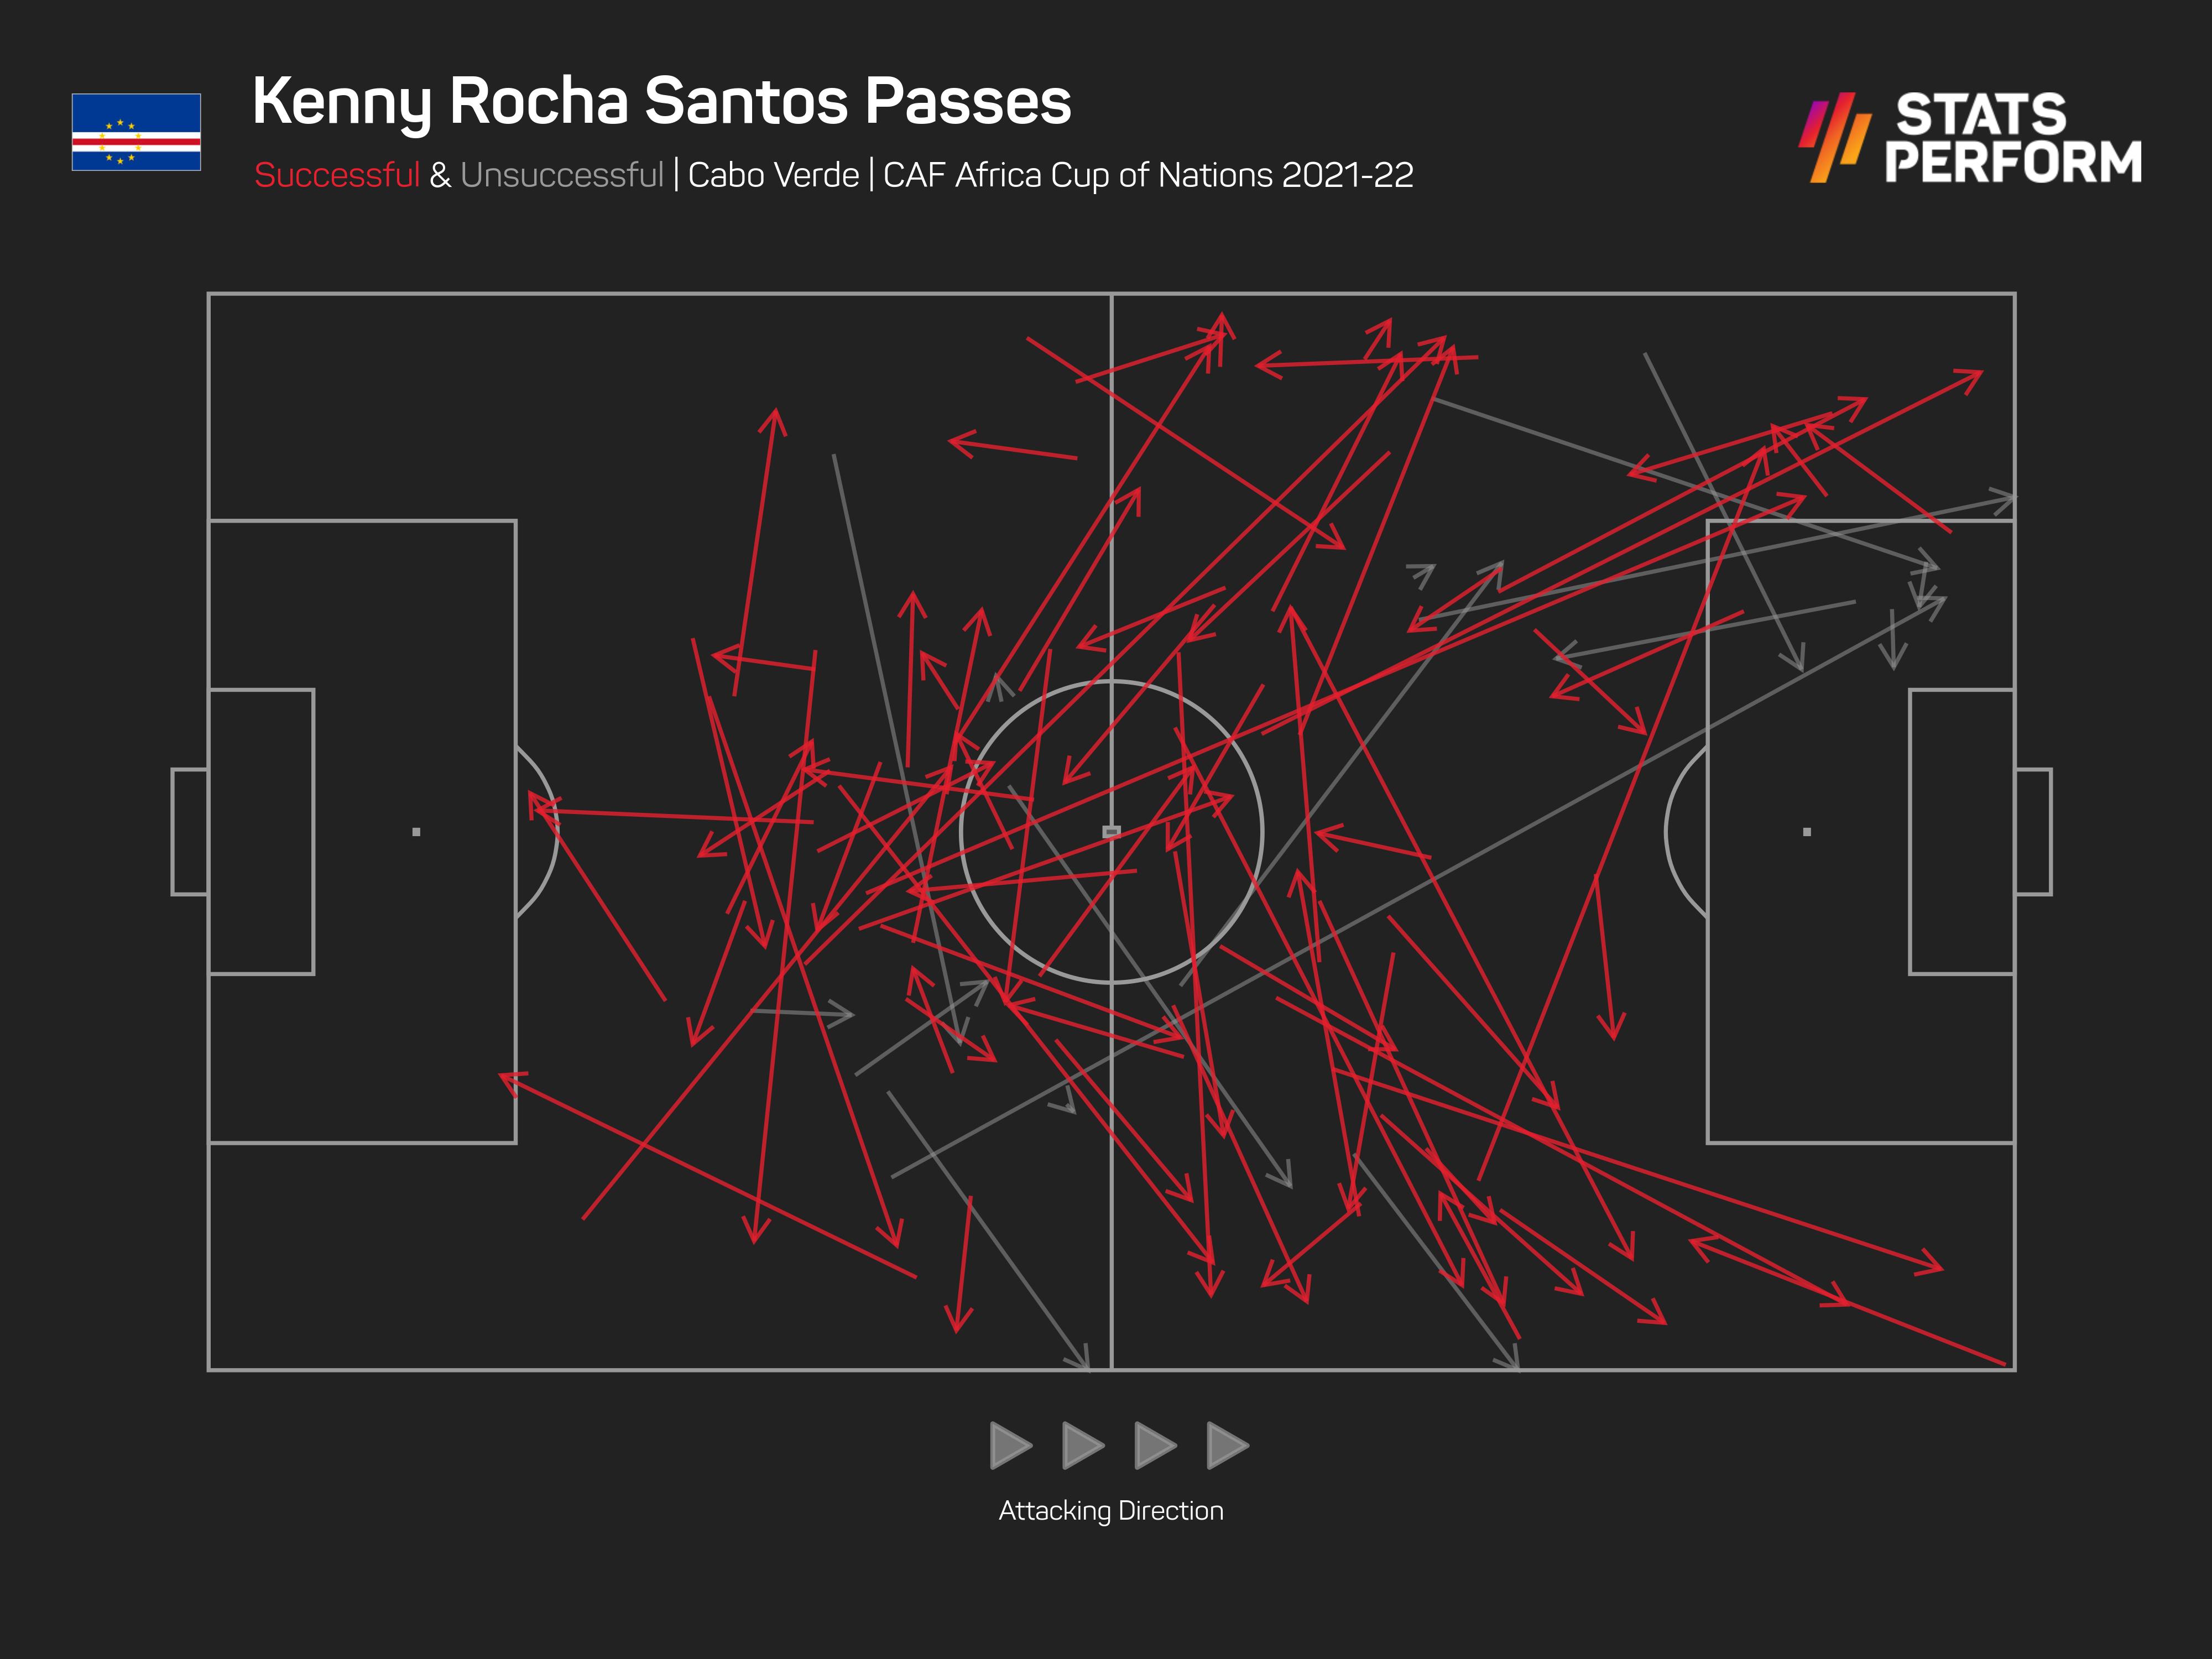 Kenny Rocha Santos pass map at Africa Cup of Nations